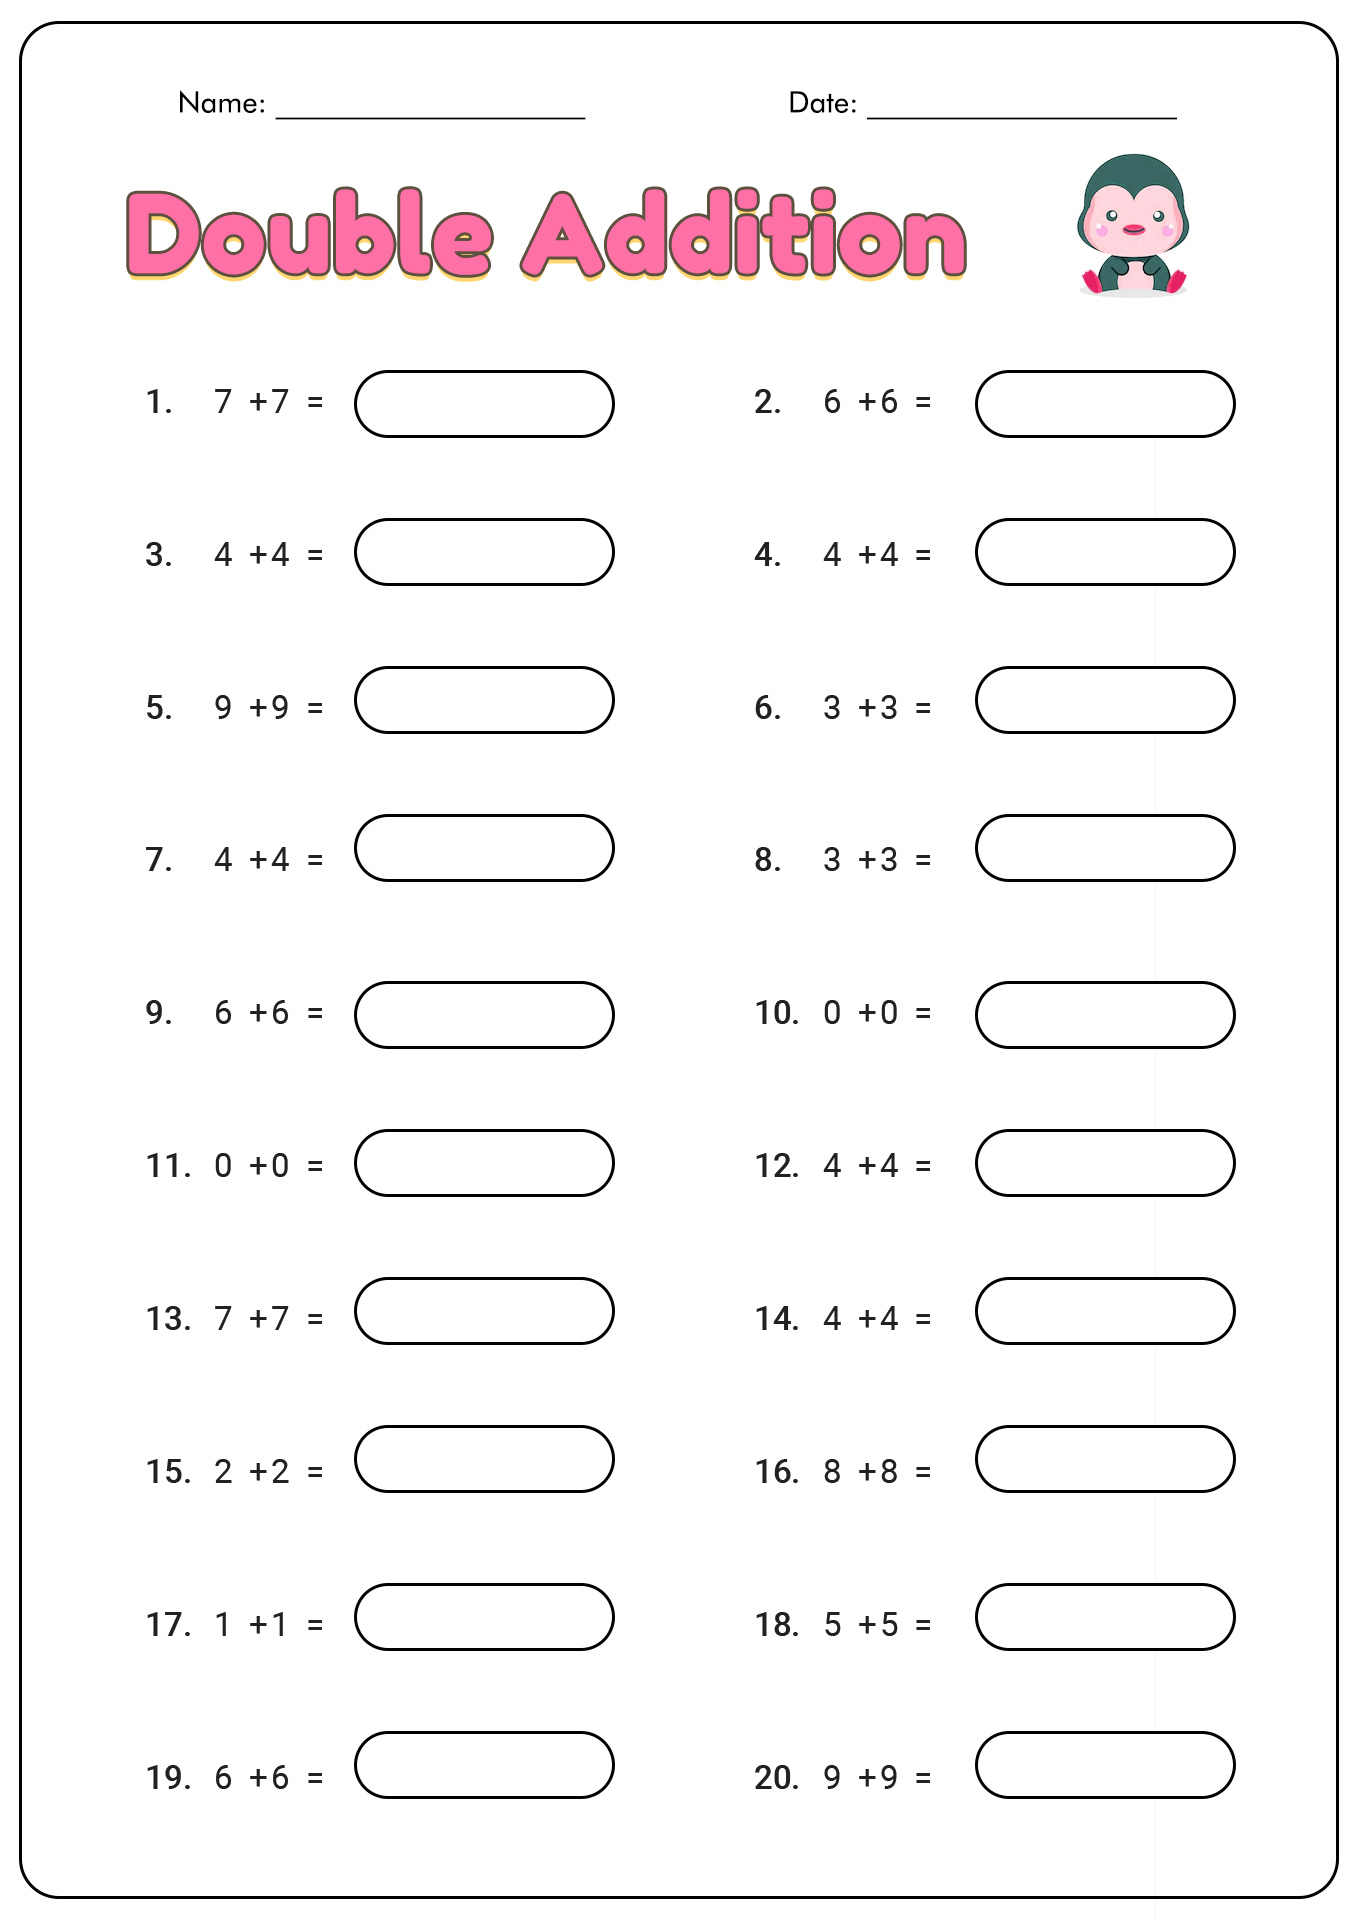 Free Printable Doubles Worksheets Printable Templates